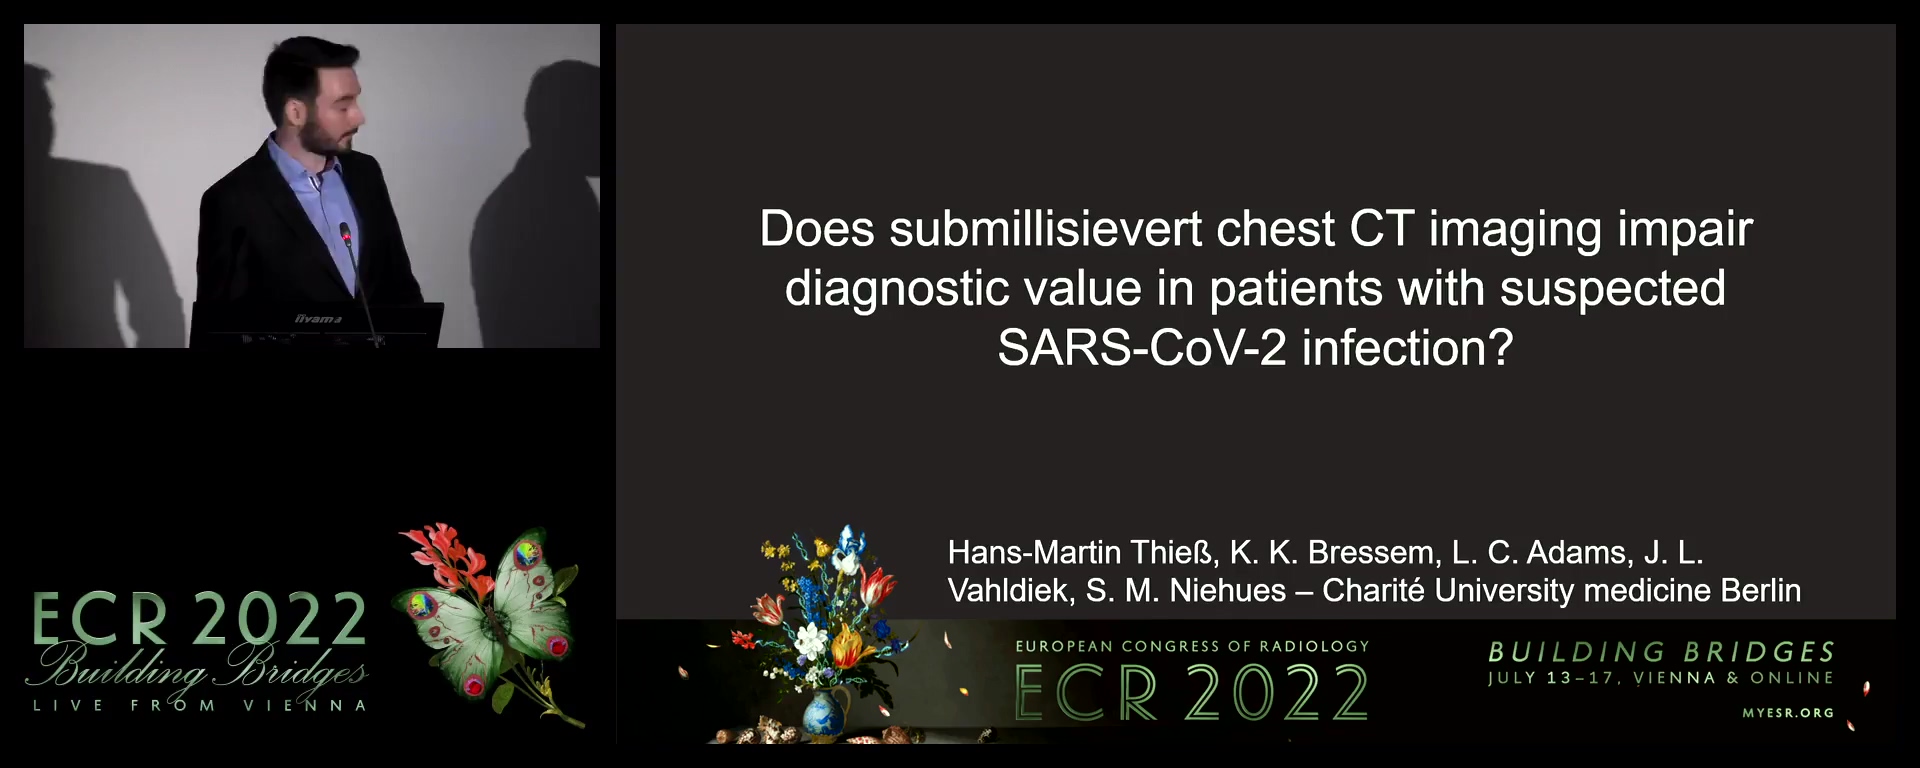 Does submillisievert chest CT imaging impair diagnostic value in patients with suspected SARS-CoV-2 infection - Hans-Martin Thieß, Berlin / DE